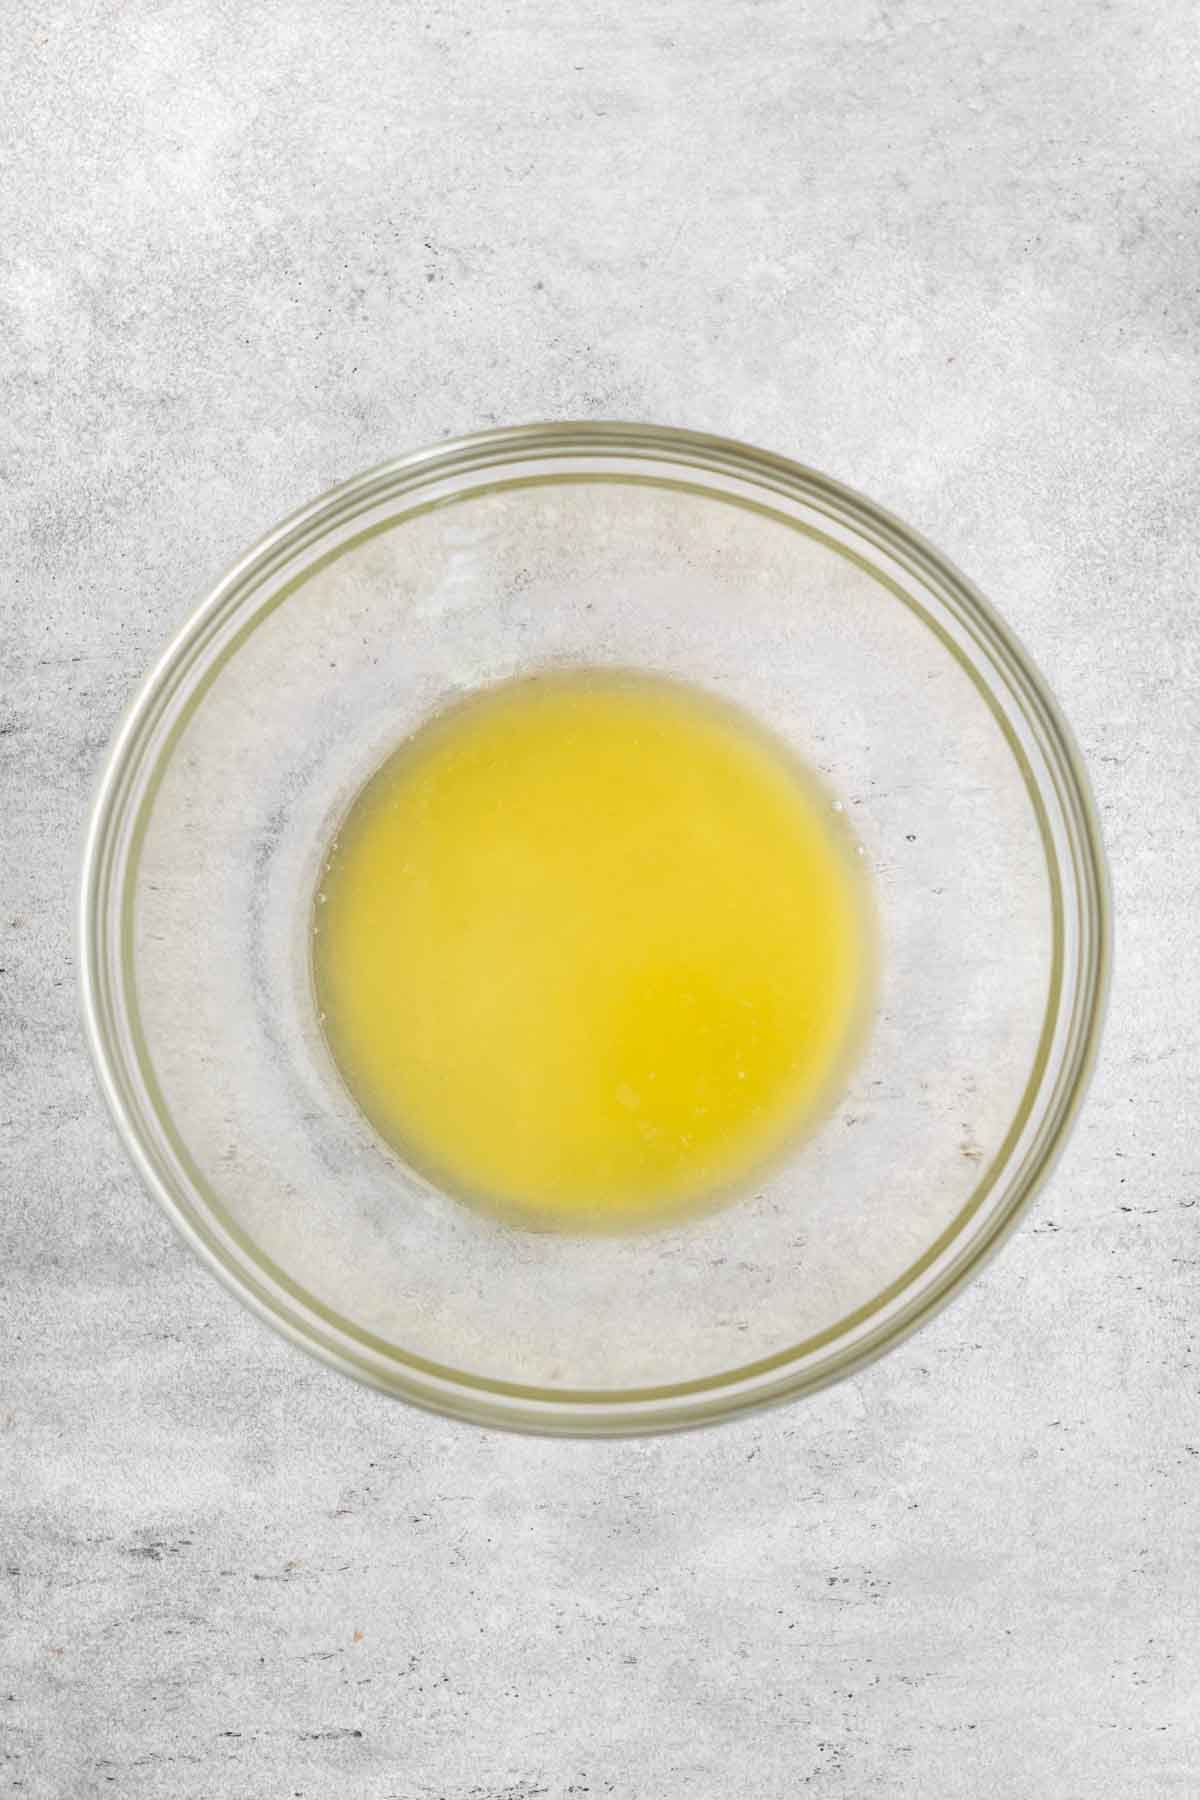 A pool of melted butter.